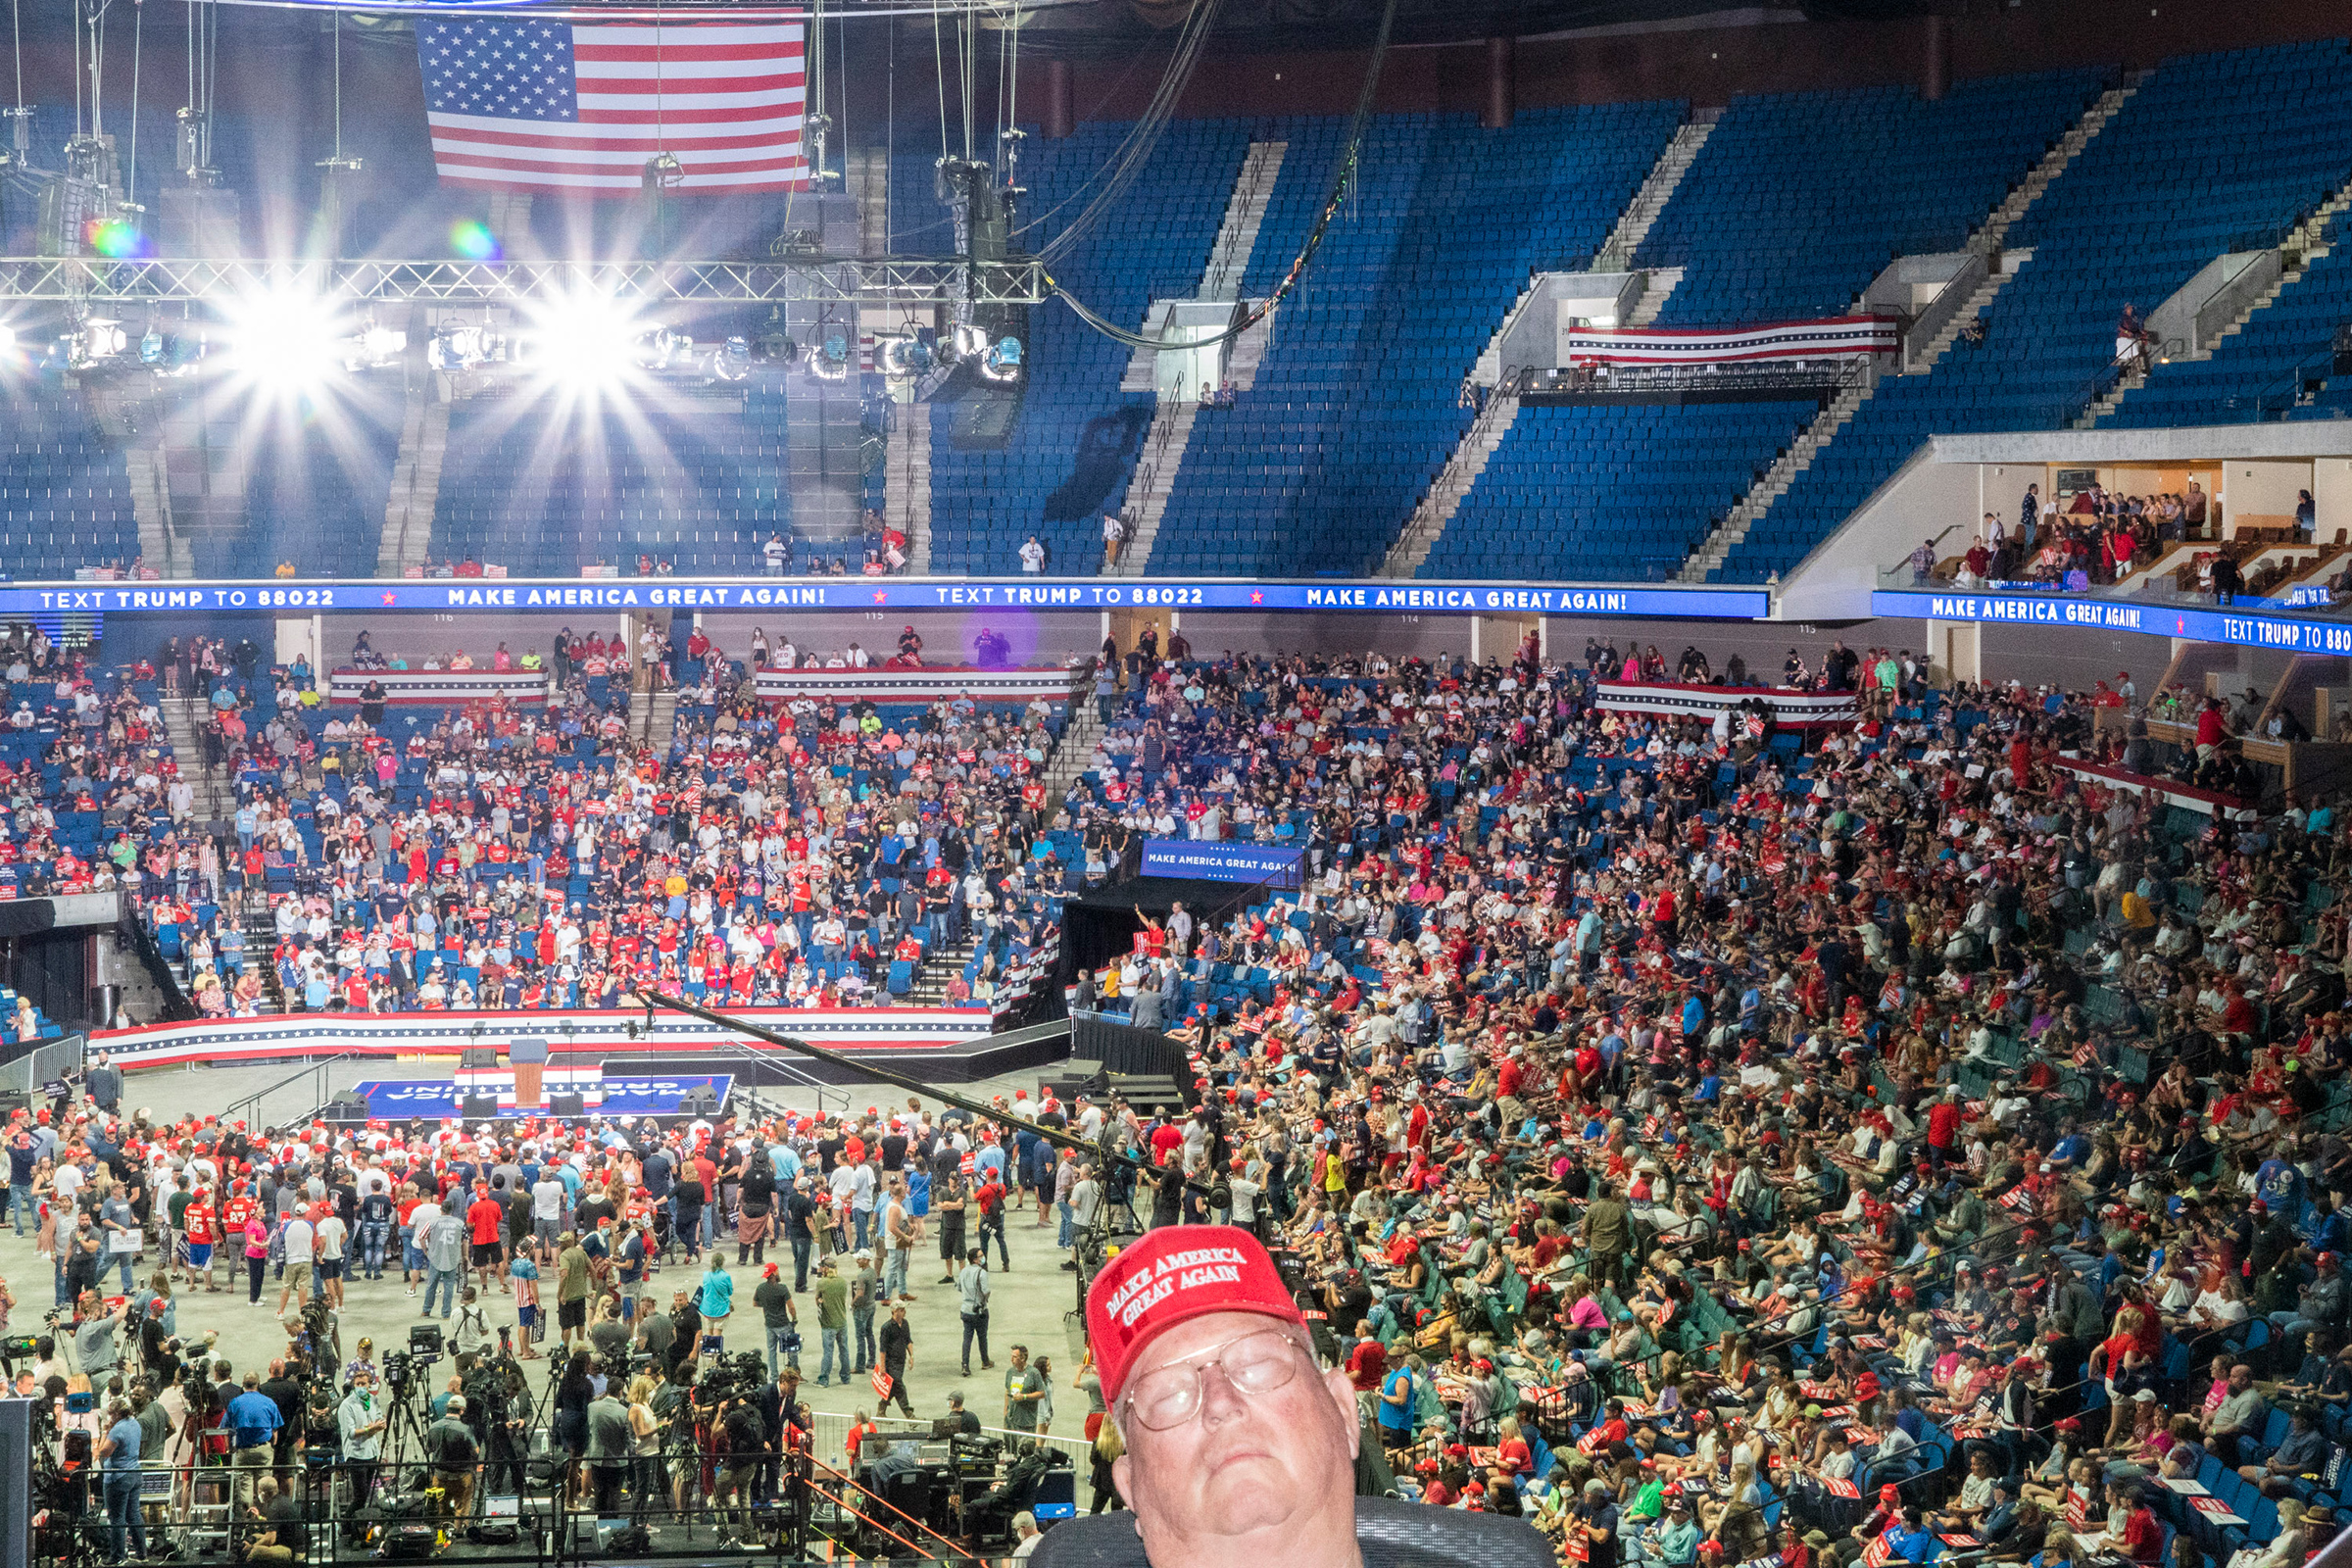 Rally attendees wait for President Trump to arrive at the BOK Center in Tulsa, Okla., on June 20. It was Trump's first campaign rally in months since the COVID-19 pandemic began in the U.S. (Peter van Agtmael—Magnum Photos for TIME)